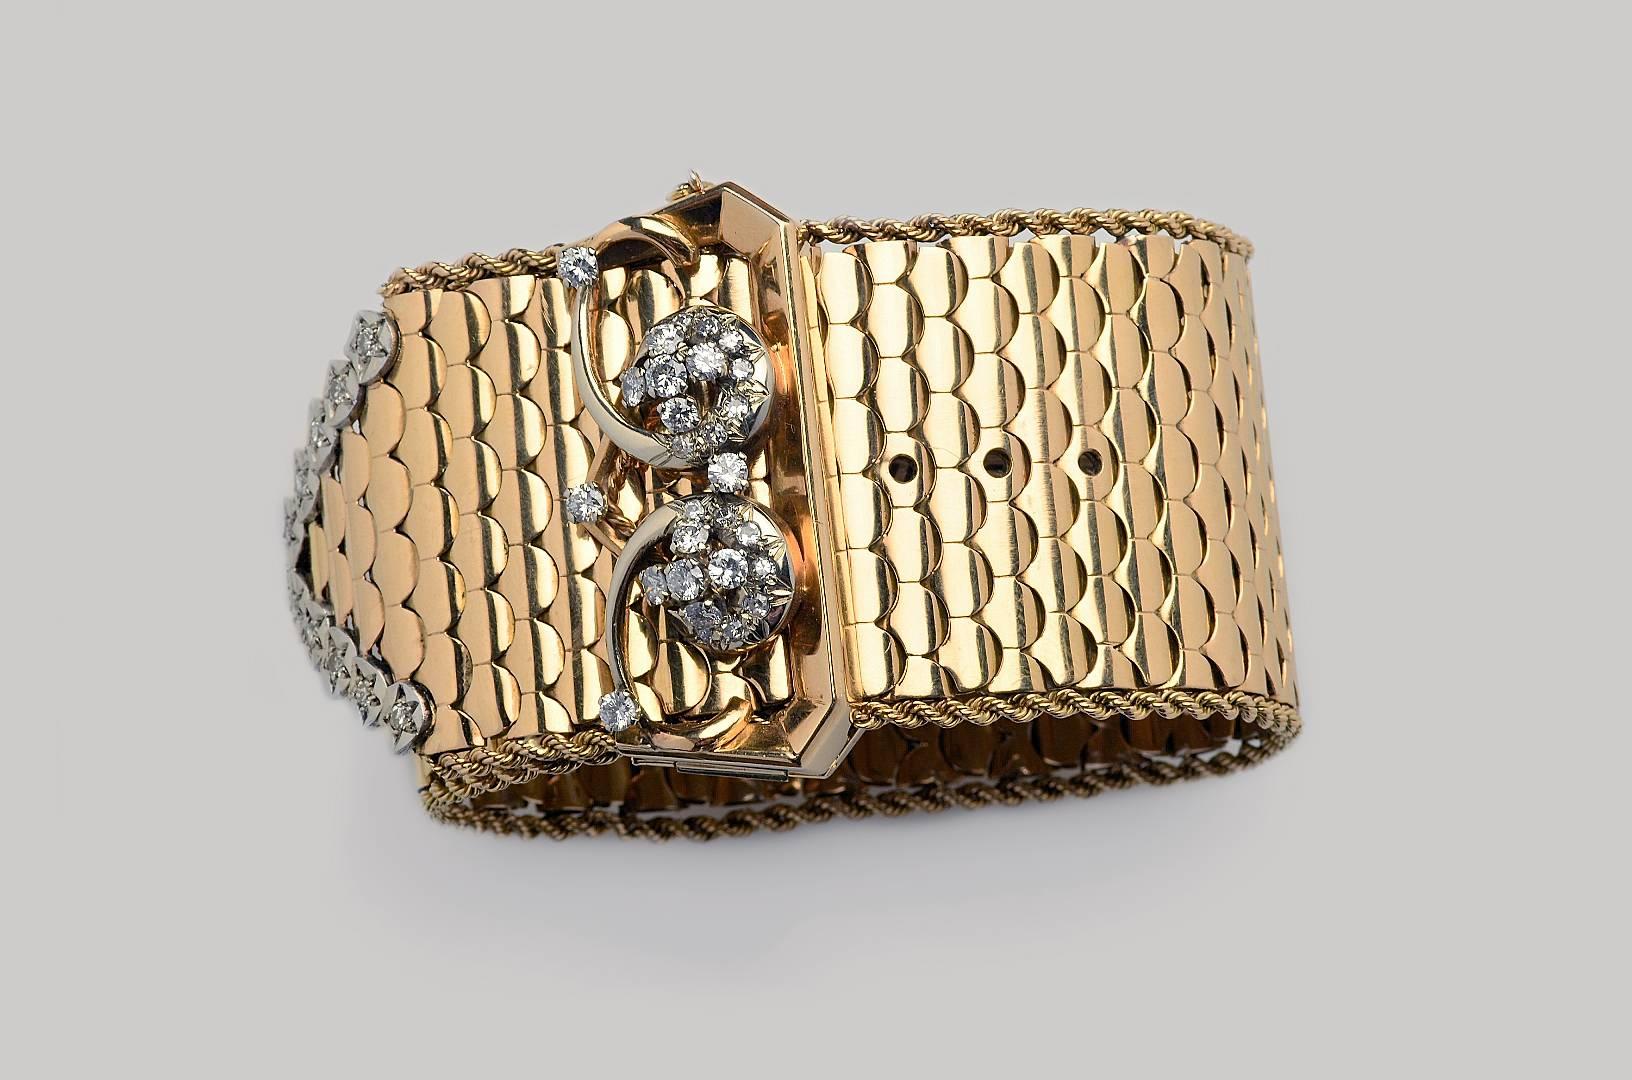 Made of Platinum and 18 Kts. yellow Gold Belt Buckle Bracelet with brillant cut-diamonds weighing 2 carats. French assay marks.